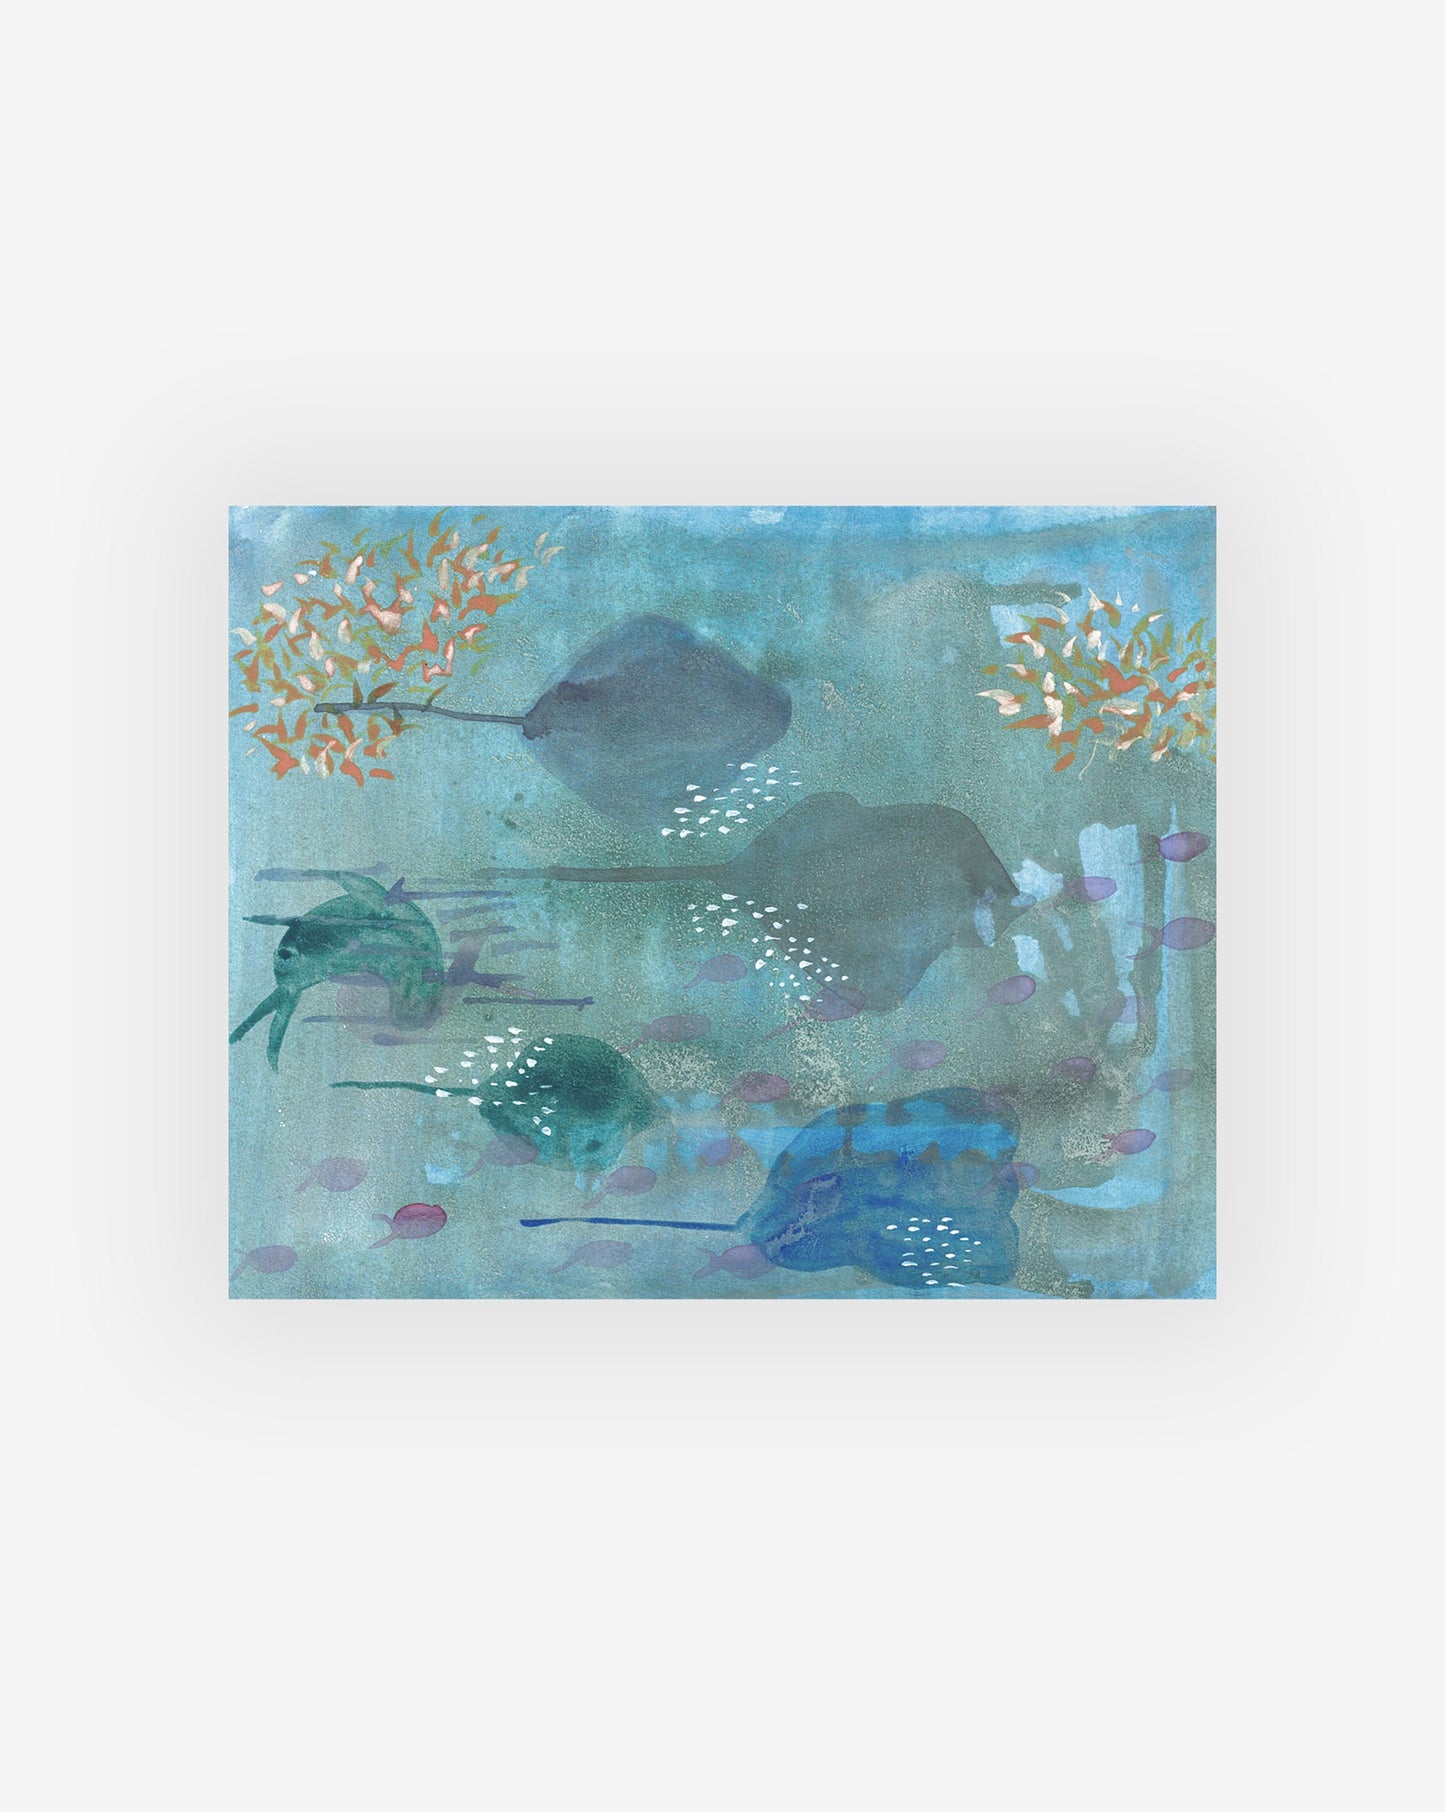 The "Rays Print" by Eskayel artist Shanan Campanaro captures stingrays gliding underwater, accompanied by a cluster of small orange fish and aquatic plants. The background is a harmonious blend of blue and green with subtle purple accents.